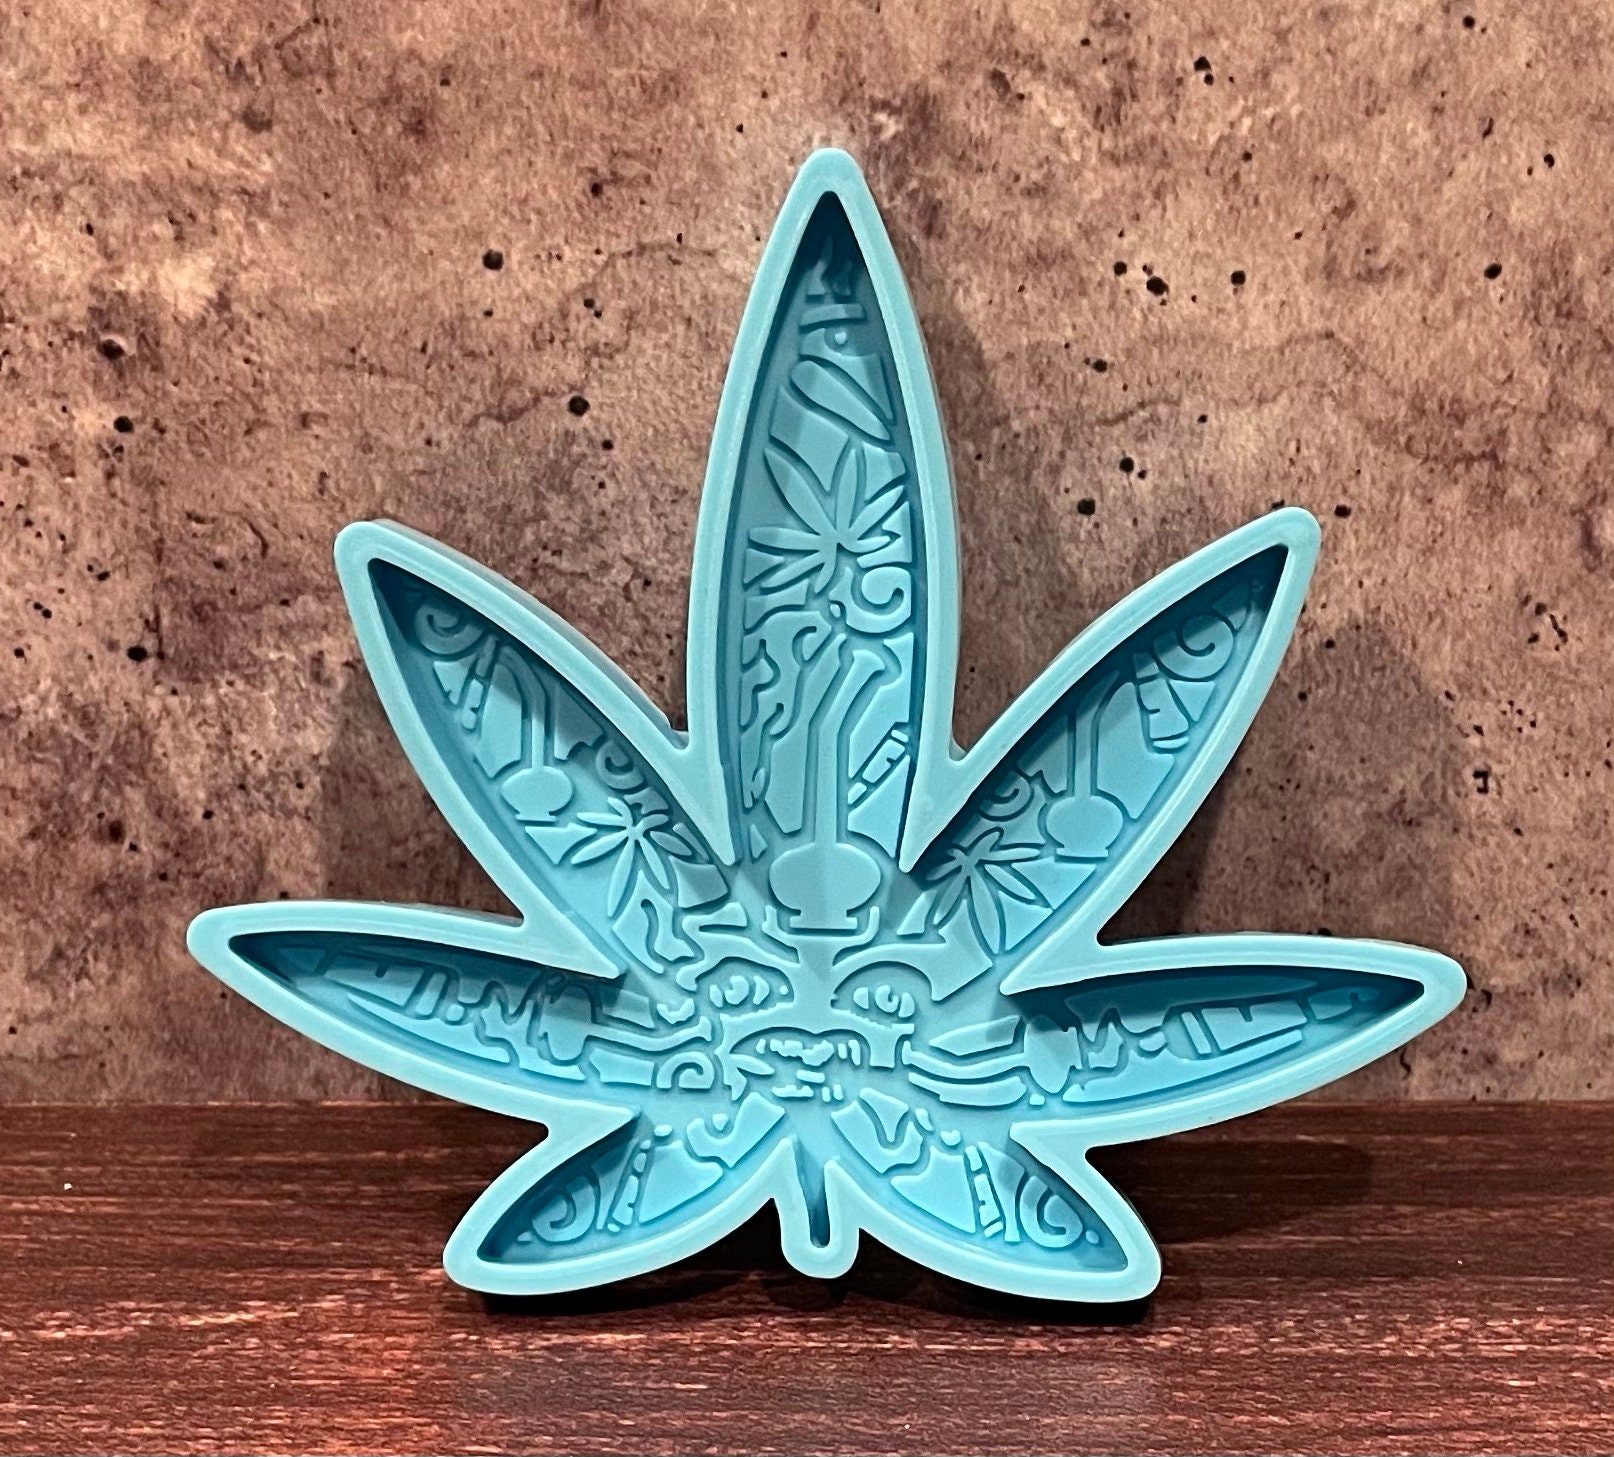 RYCORE Pot Leaf Silicone Mold Design | Silicone Molds for Baking Unique Treats & Gummies